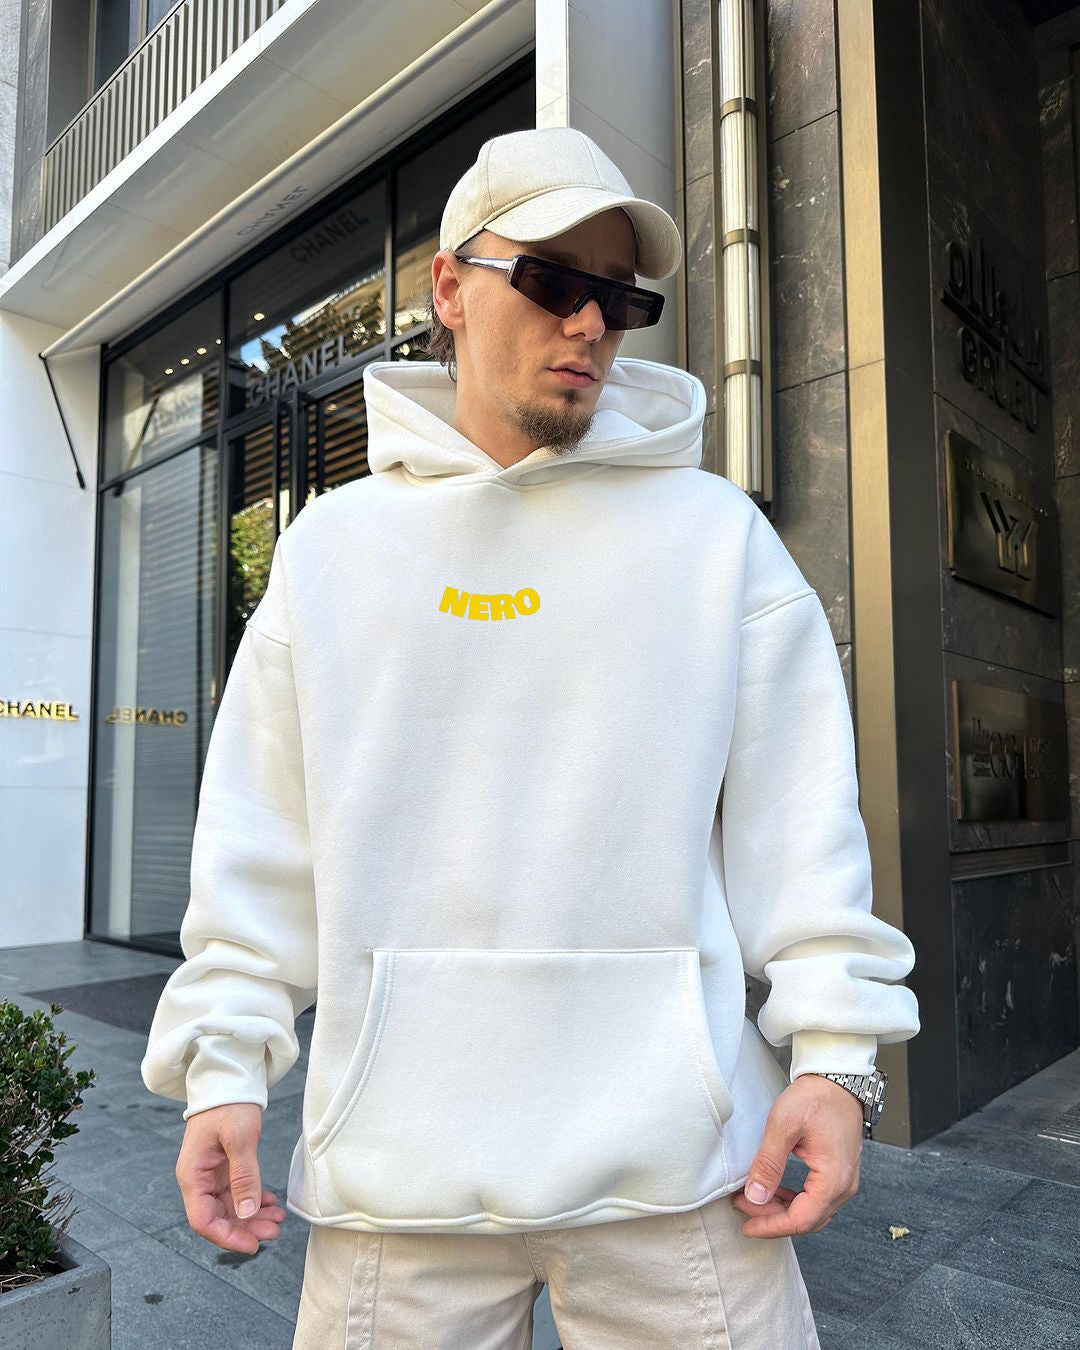 Off-White "Tired" Printed Oversize Hoodie